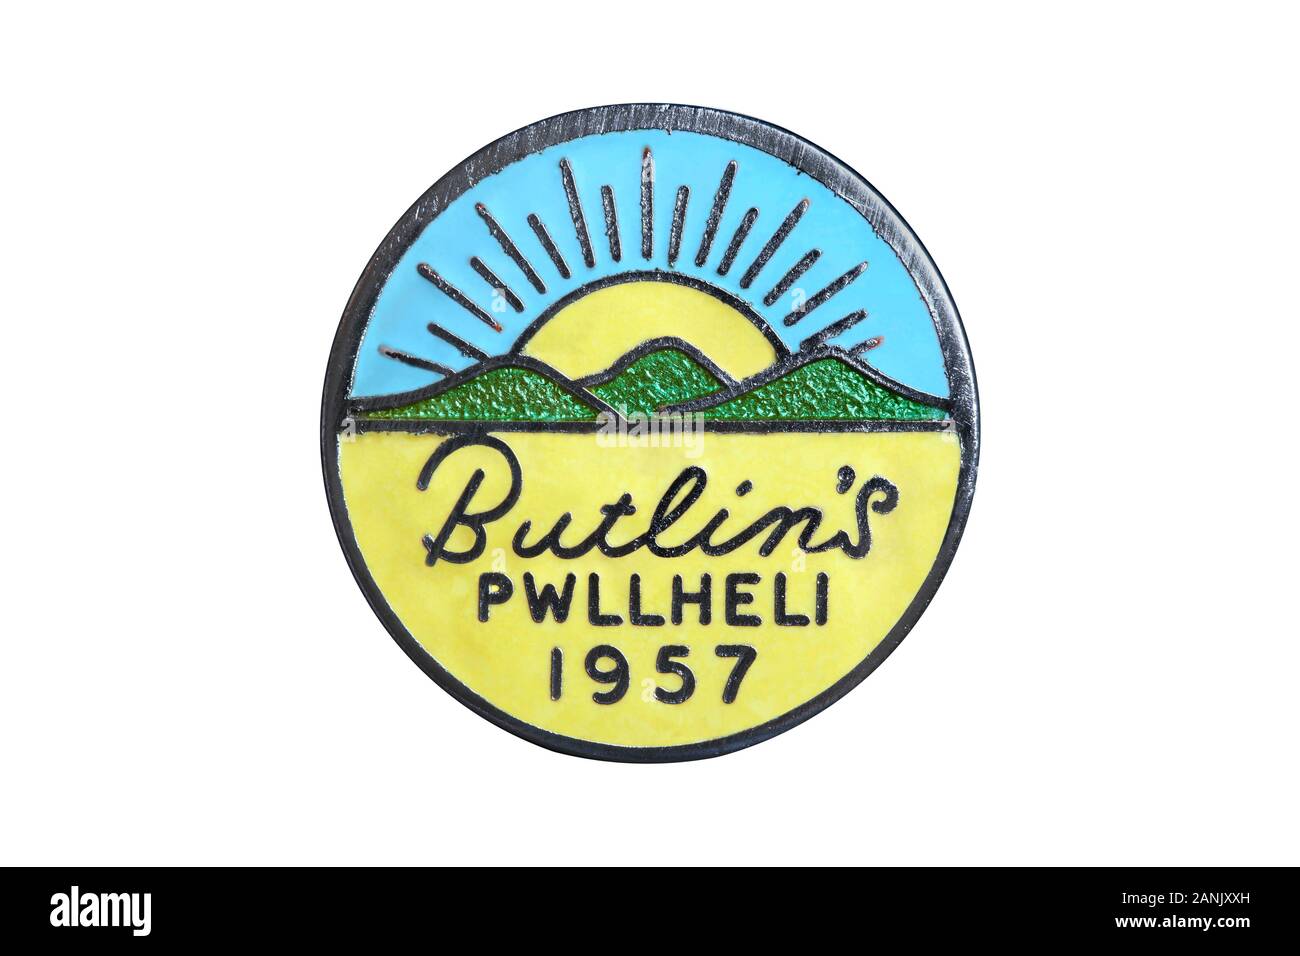 A 1957 badge from the Butlin's Holiday Camp at Pwllheli. Featuring sun, sand and the green hills of North Wales. Stock Photo